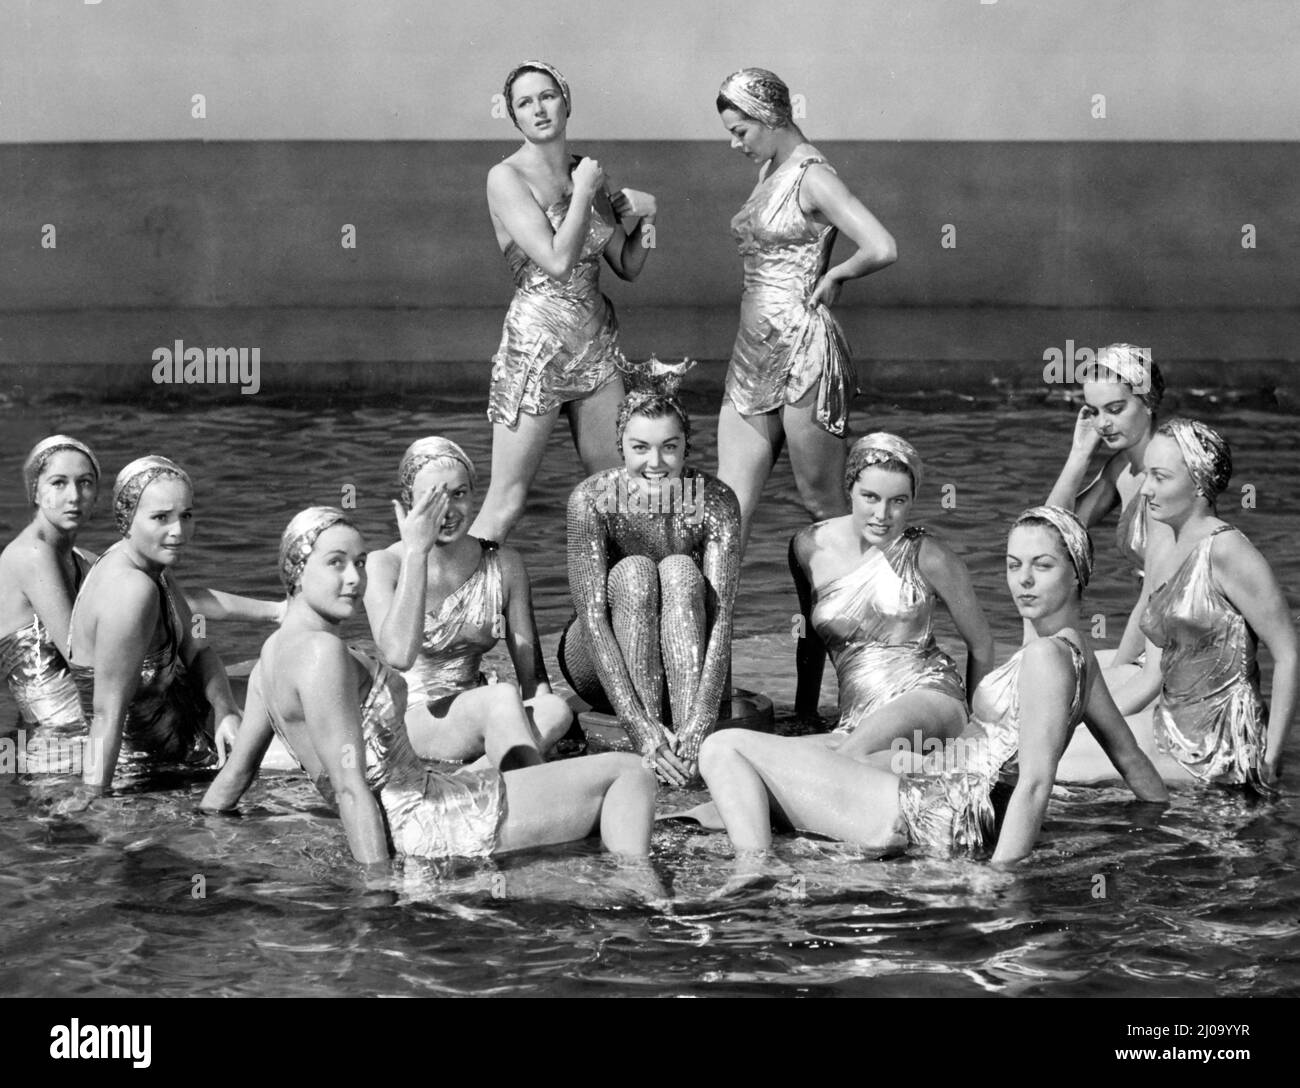 Balck and white on set movie still of Esther Williams, famous for her swimming movies in the 1940s and 50s. Stock Photo